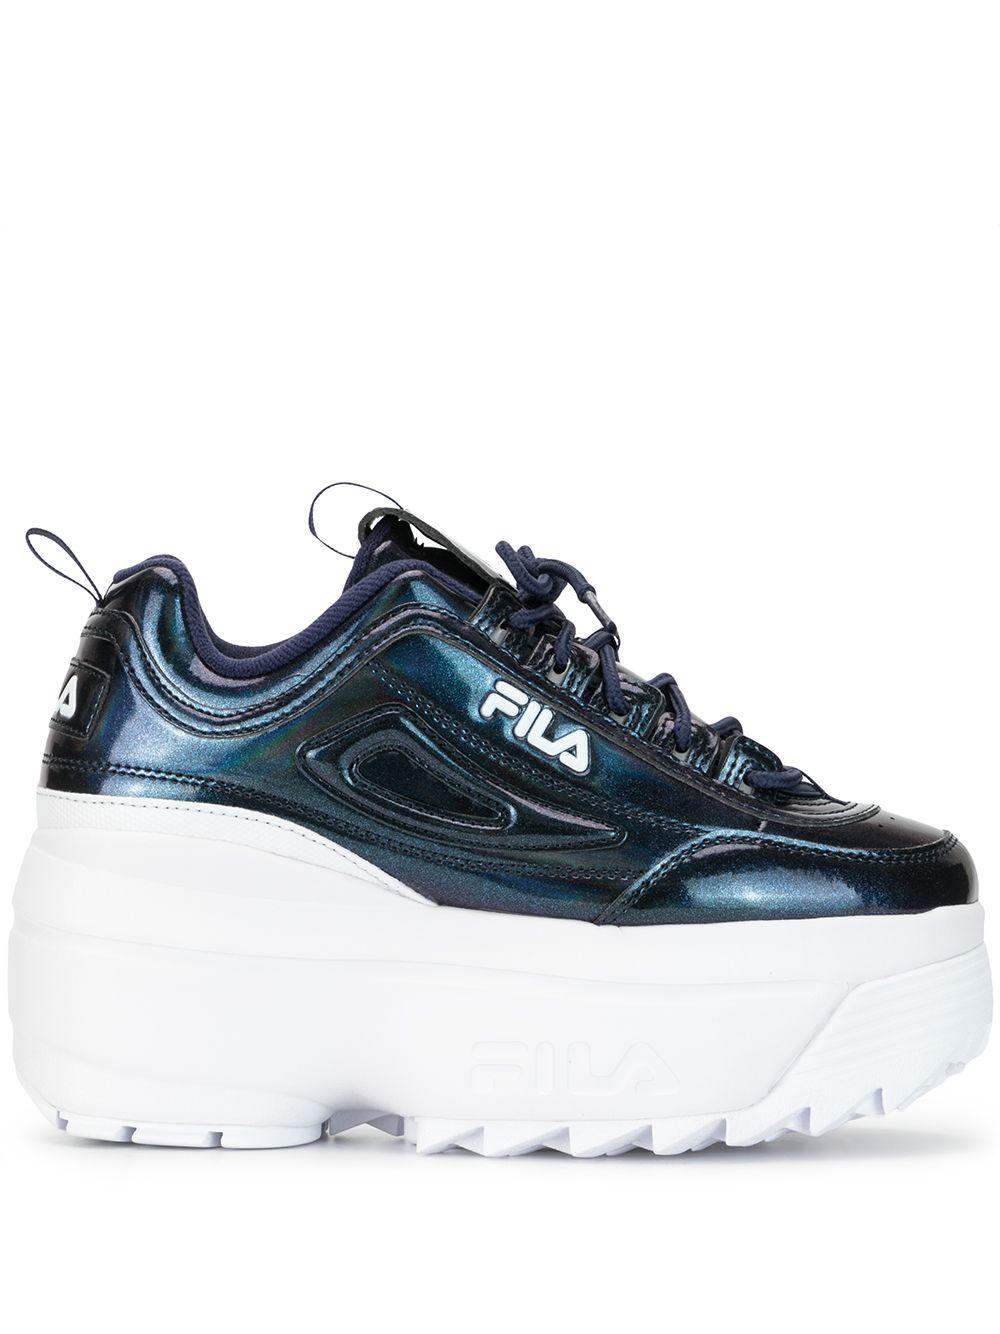 marionet fax celle Fila Galactic Gaze Wedge Sneakers in Blue | Lyst